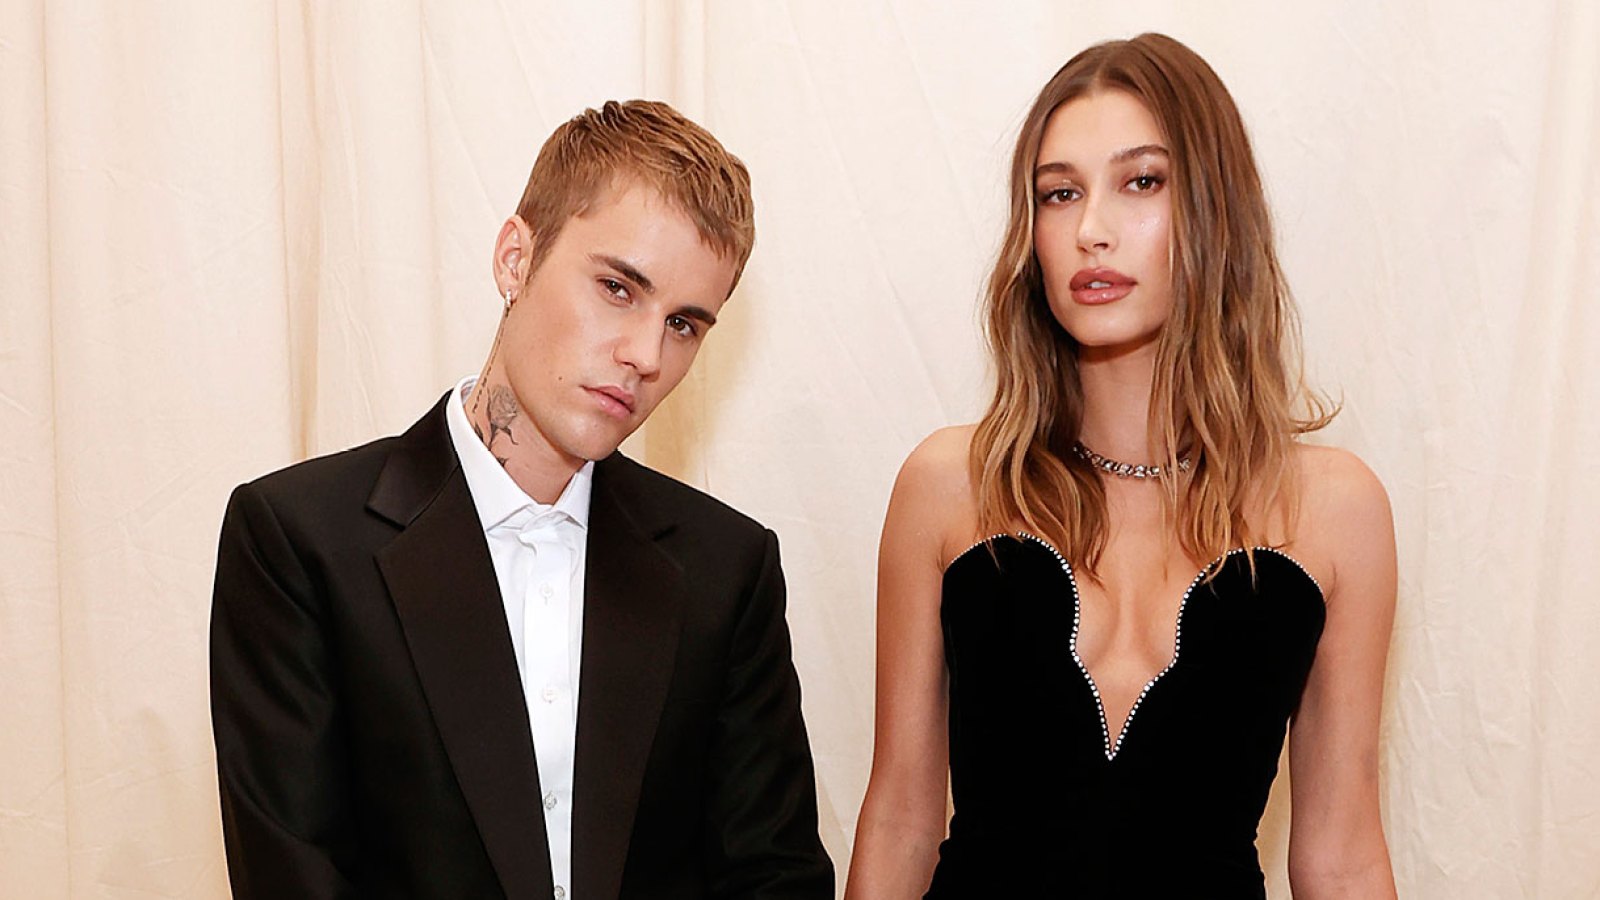 Justin Bieber Says Precious Wife Hailey Bieber Has Captivated His Heart on 5th Anniversary